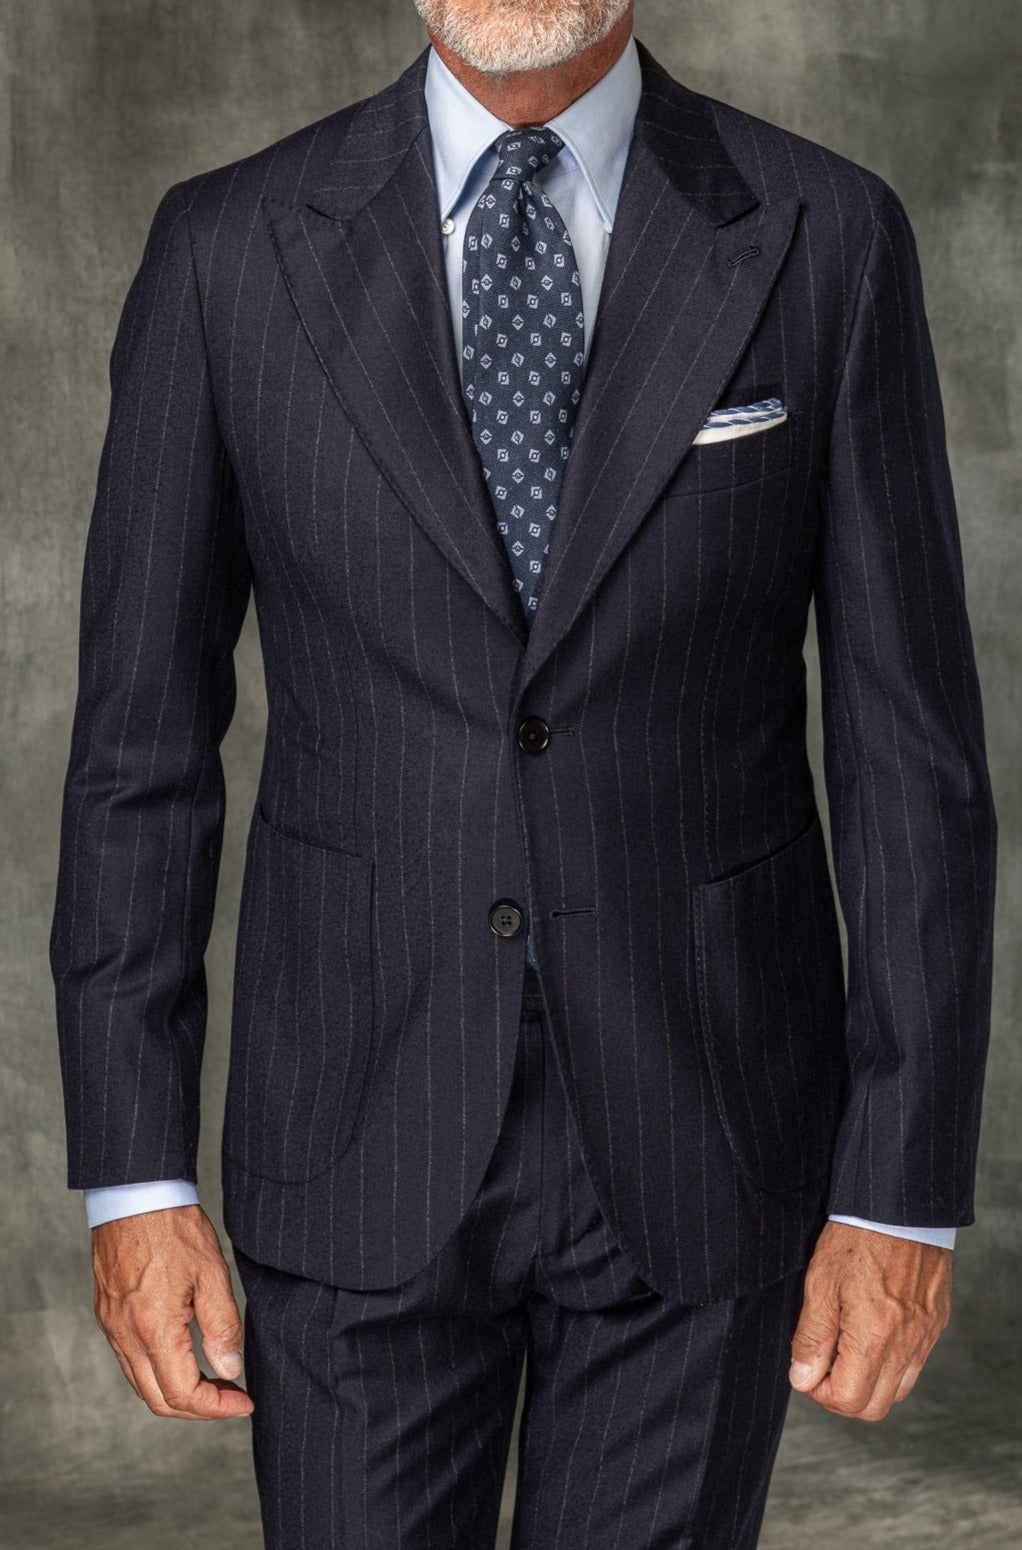 Blue striped suit "Soragna Capsule Collection" - Made in Italy